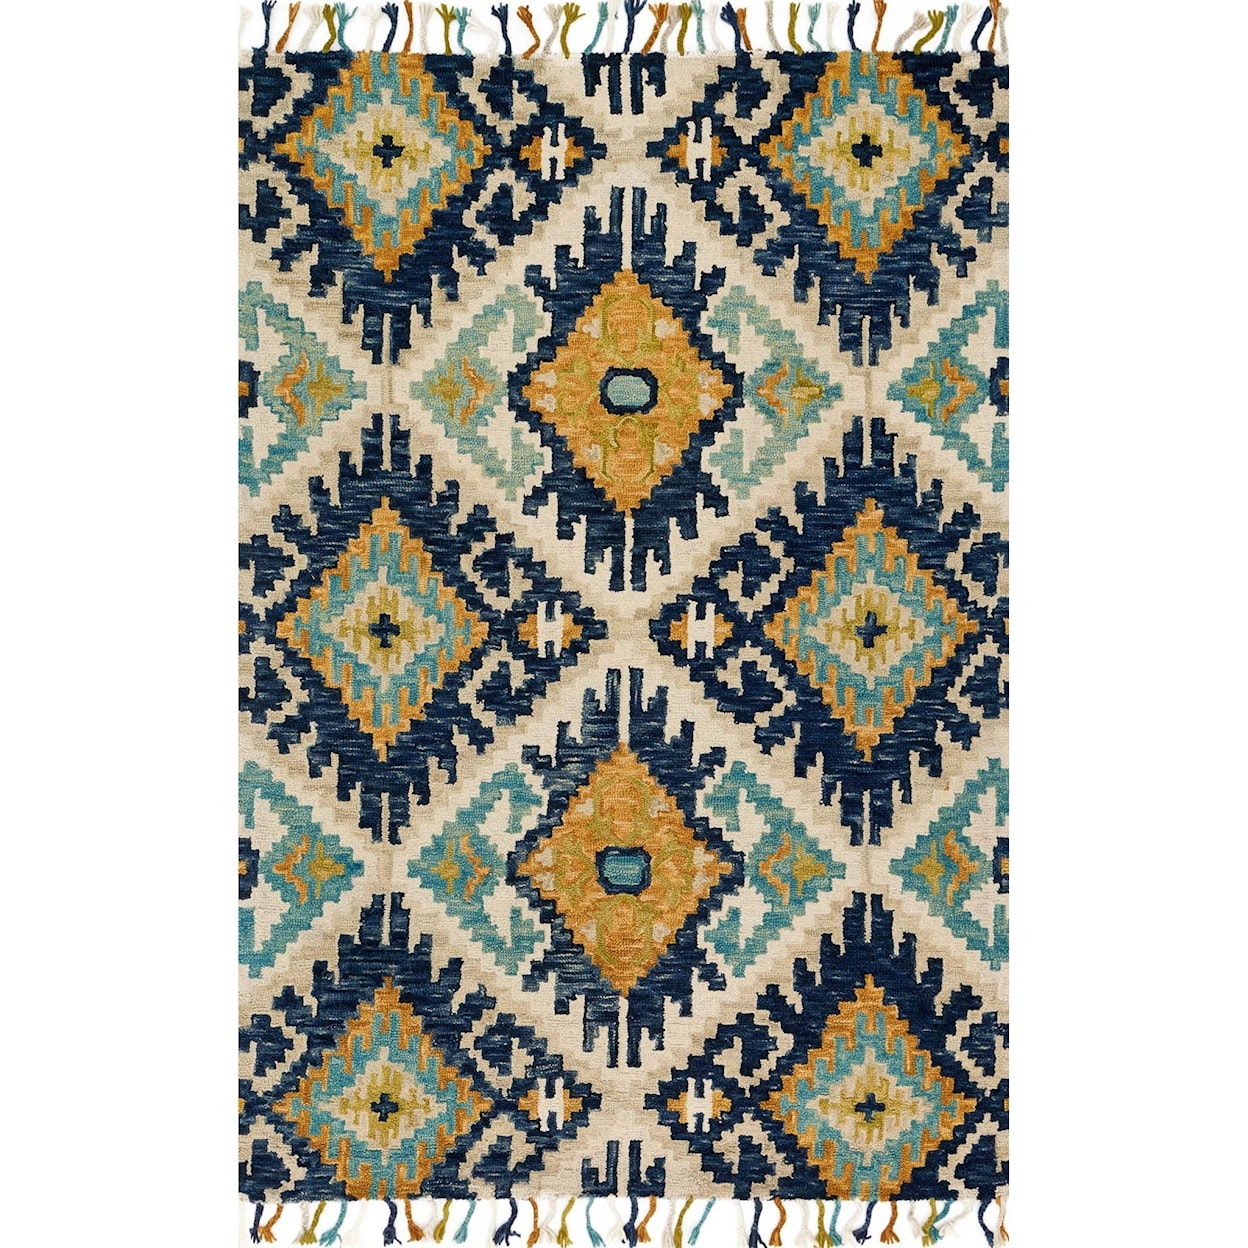 Magnolia Home by Joanna Gaines for Loloi Brushstroke 3' 6" x 5' 6" Rectangle Rug